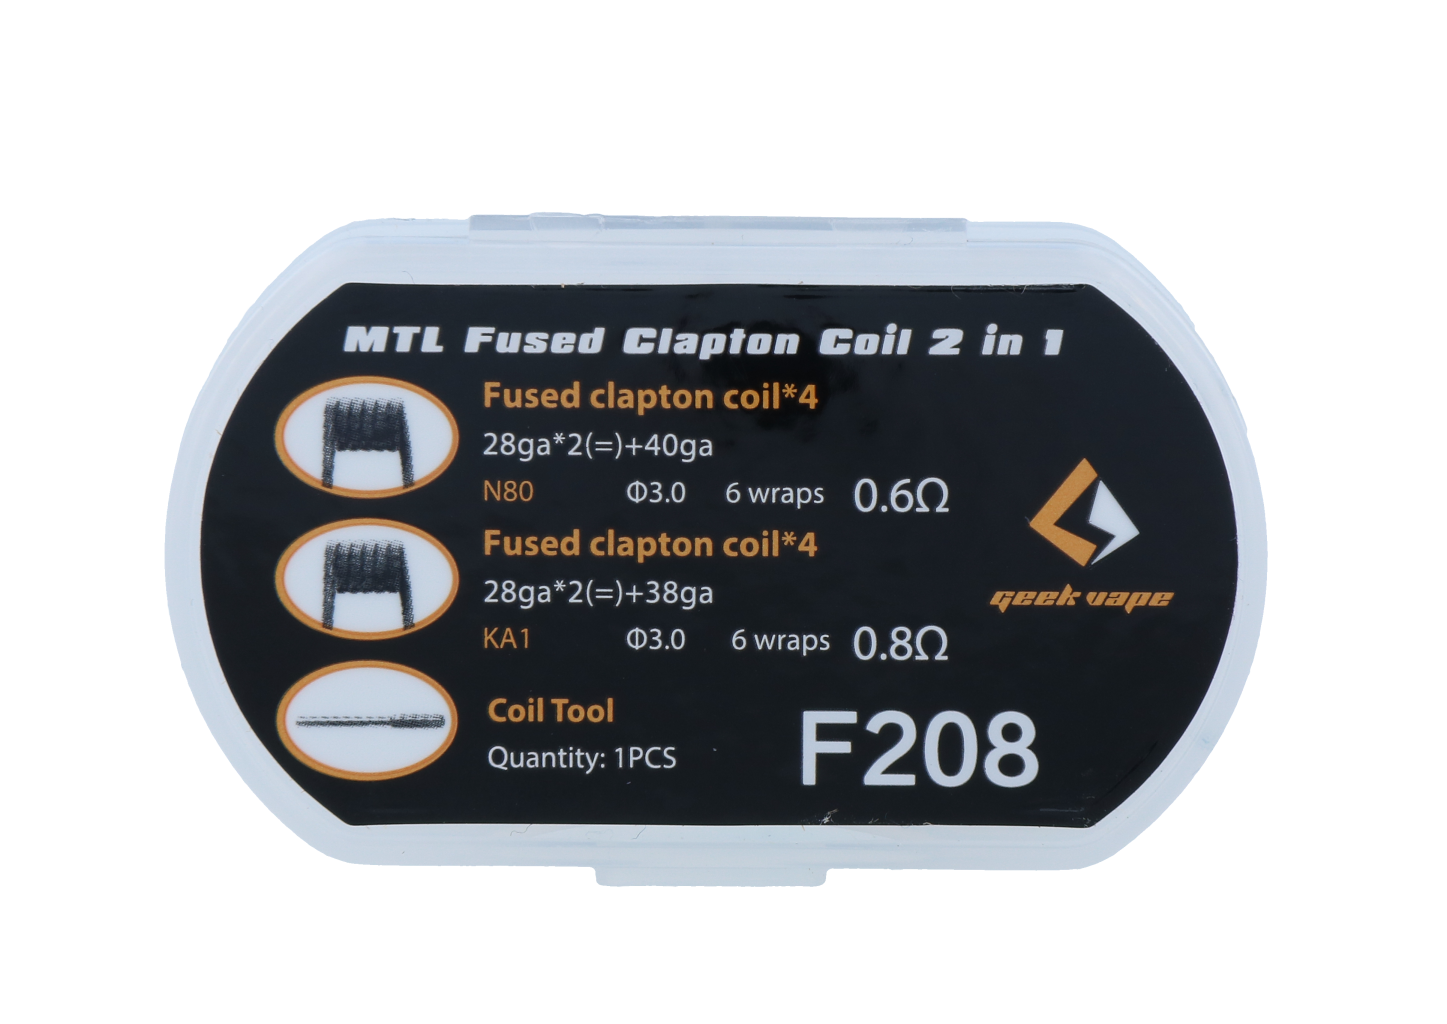 GeekVape MTL Fused Clapton Coil 2 in 1 Set